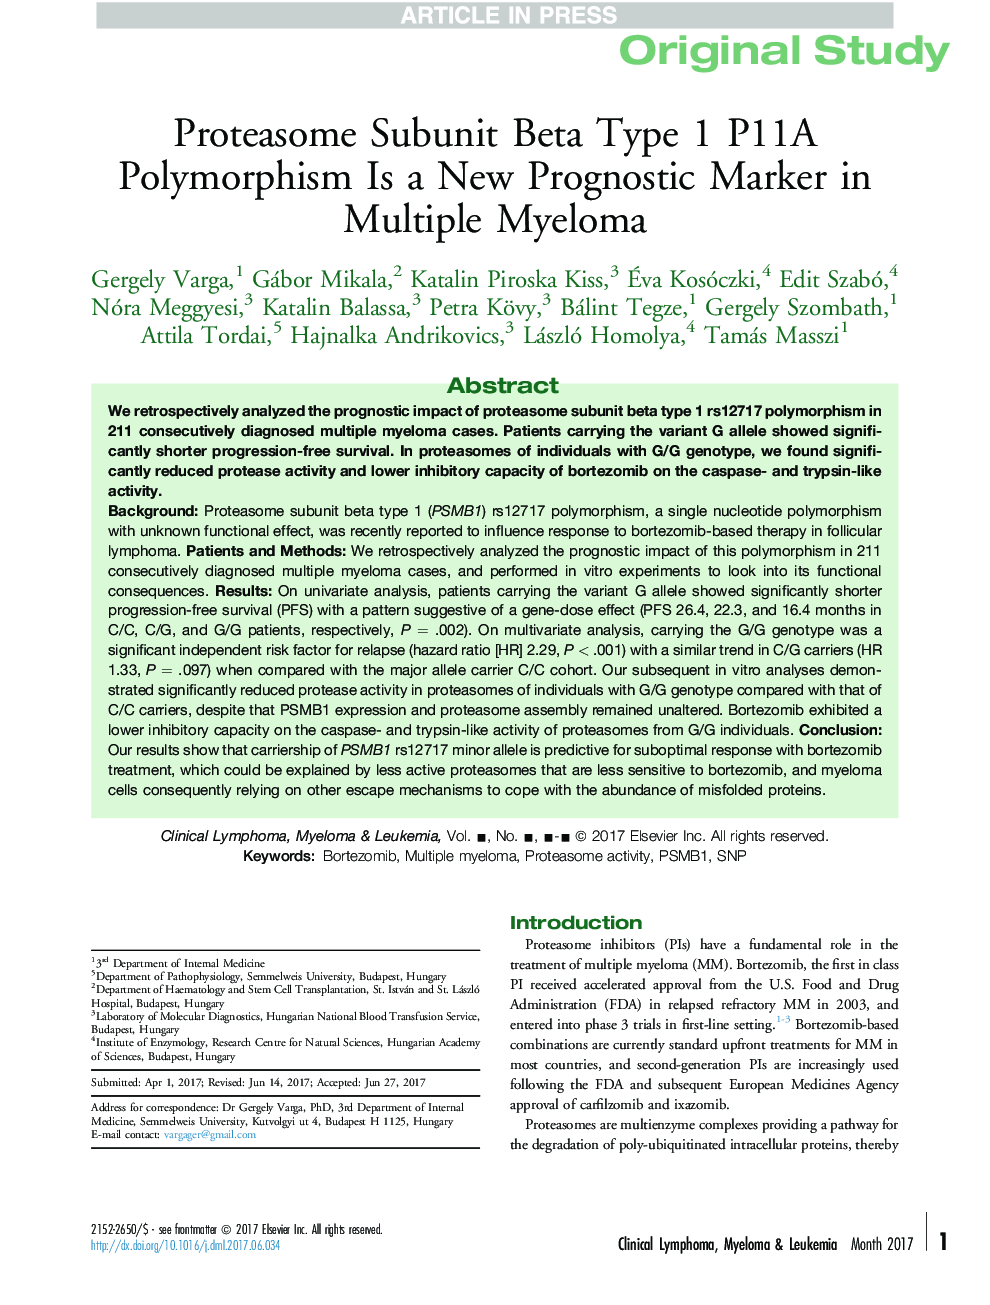 Proteasome Subunit Beta Type 1 P11A Polymorphism Is a New Prognostic Marker in Multiple Myeloma